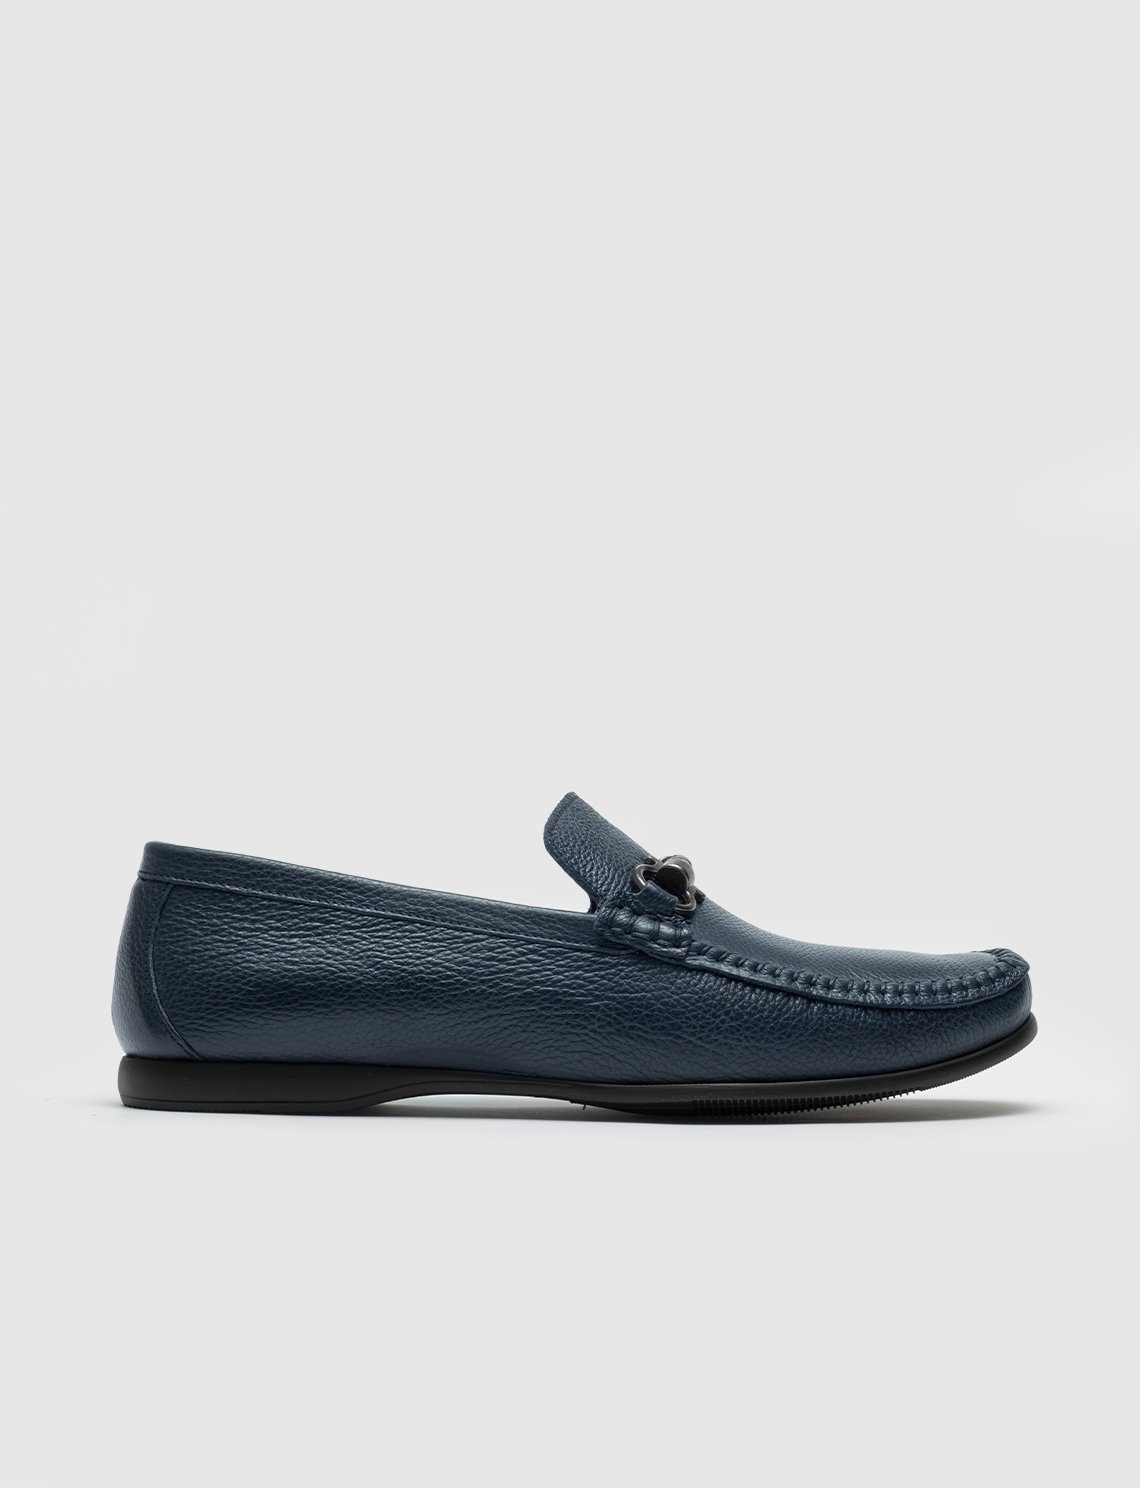 Genuine Leather Men Loafers